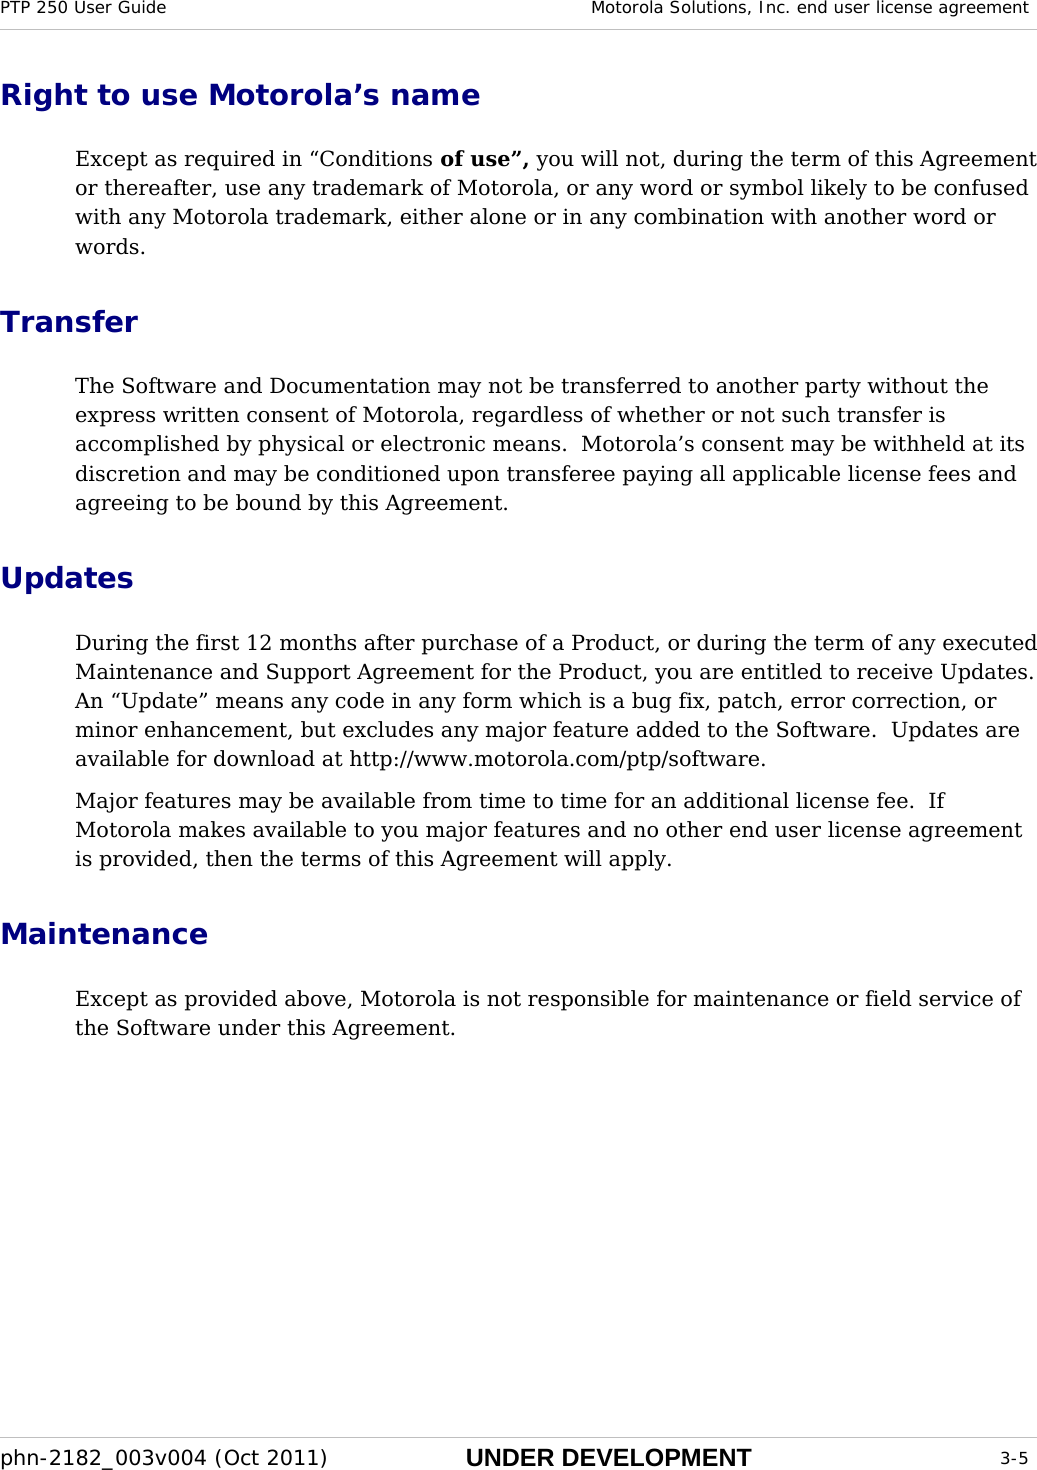 PTP 250 User Guide  Motorola Solutions, Inc. end user license agreement  phn-2182_003v004 (Oct 2011)  UNDER DEVELOPMENT  3-5  Right to use Motorola’s name Except as required in “Conditions of use”, you will not, during the term of this Agreement or thereafter, use any trademark of Motorola, or any word or symbol likely to be confused with any Motorola trademark, either alone or in any combination with another word or words. Transfer The Software and Documentation may not be transferred to another party without the express written consent of Motorola, regardless of whether or not such transfer is accomplished by physical or electronic means.  Motorola’s consent may be withheld at its discretion and may be conditioned upon transferee paying all applicable license fees and agreeing to be bound by this Agreement. Updates During the first 12 months after purchase of a Product, or during the term of any executed Maintenance and Support Agreement for the Product, you are entitled to receive Updates.  An “Update” means any code in any form which is a bug fix, patch, error correction, or minor enhancement, but excludes any major feature added to the Software.  Updates are available for download at http://www.motorola.com/ptp/software. Major features may be available from time to time for an additional license fee.  If Motorola makes available to you major features and no other end user license agreement is provided, then the terms of this Agreement will apply. Maintenance Except as provided above, Motorola is not responsible for maintenance or field service of the Software under this Agreement. 